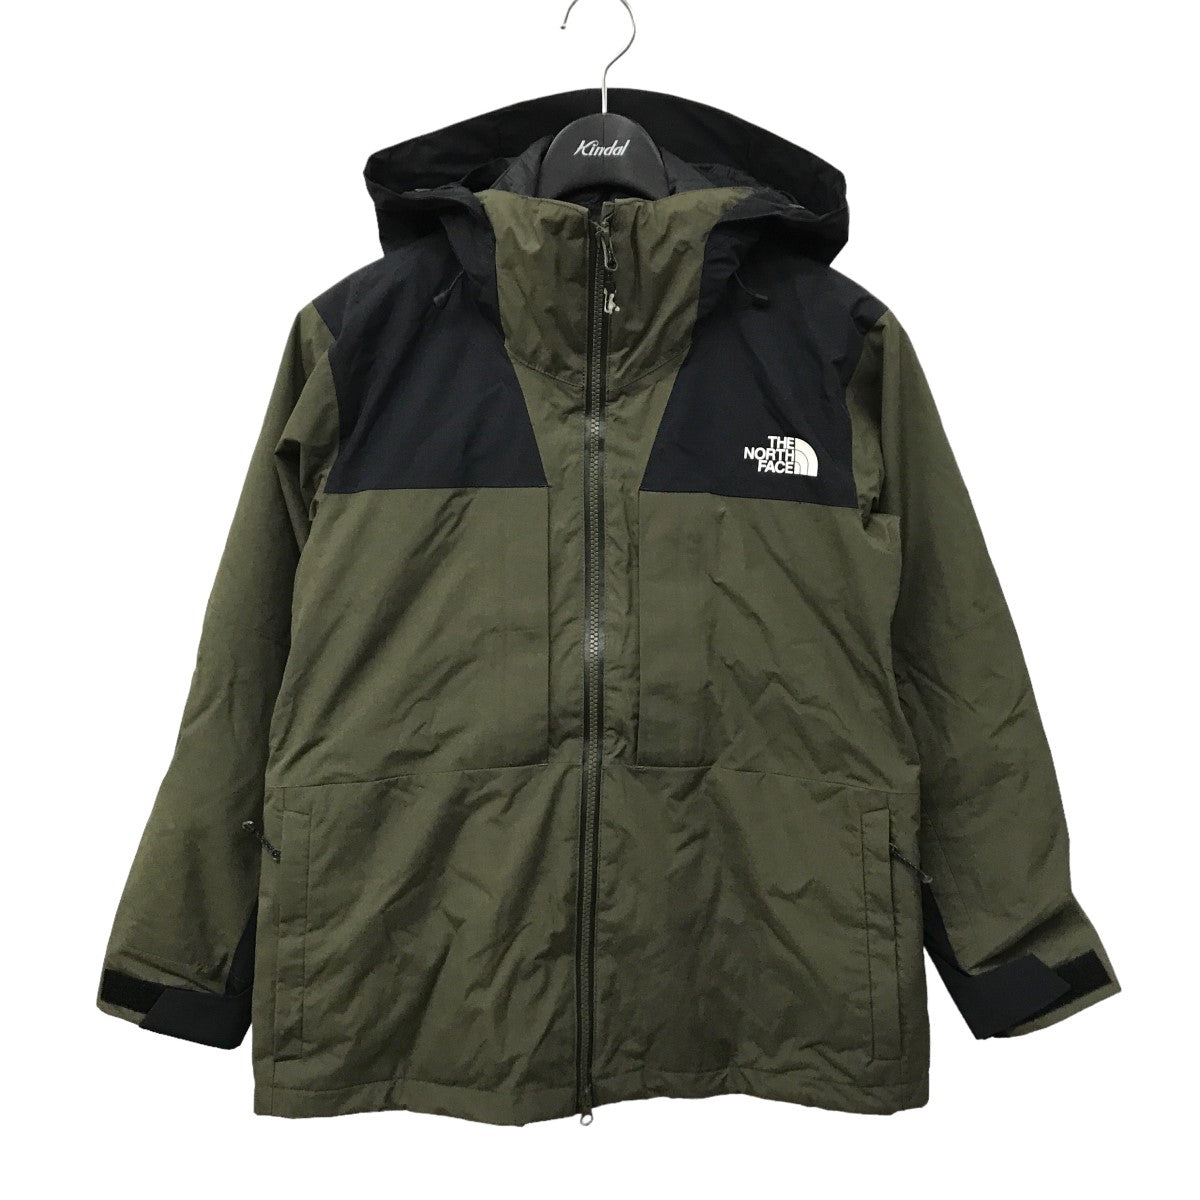 THE NORTH FACE(ザノースフェイス) STORMPEAK TRICLIMATE JACKET 